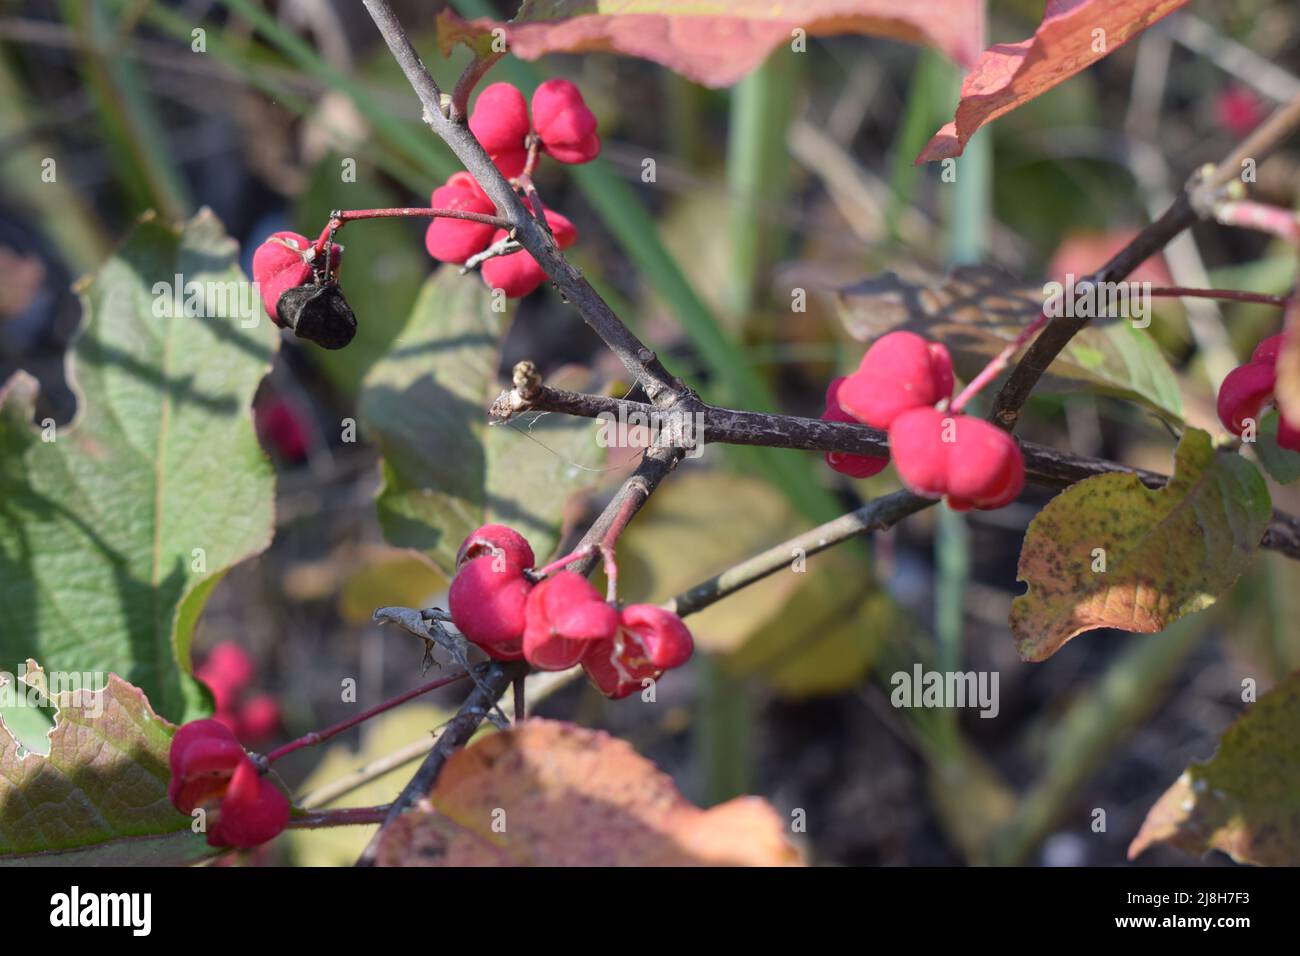 Beautifully colored autumn leaves of Euonymus hamiltonianus (Mayumi). Branches with pink fruits of Euonymus Hamiltonianus tree, known by the common na Stock Photo